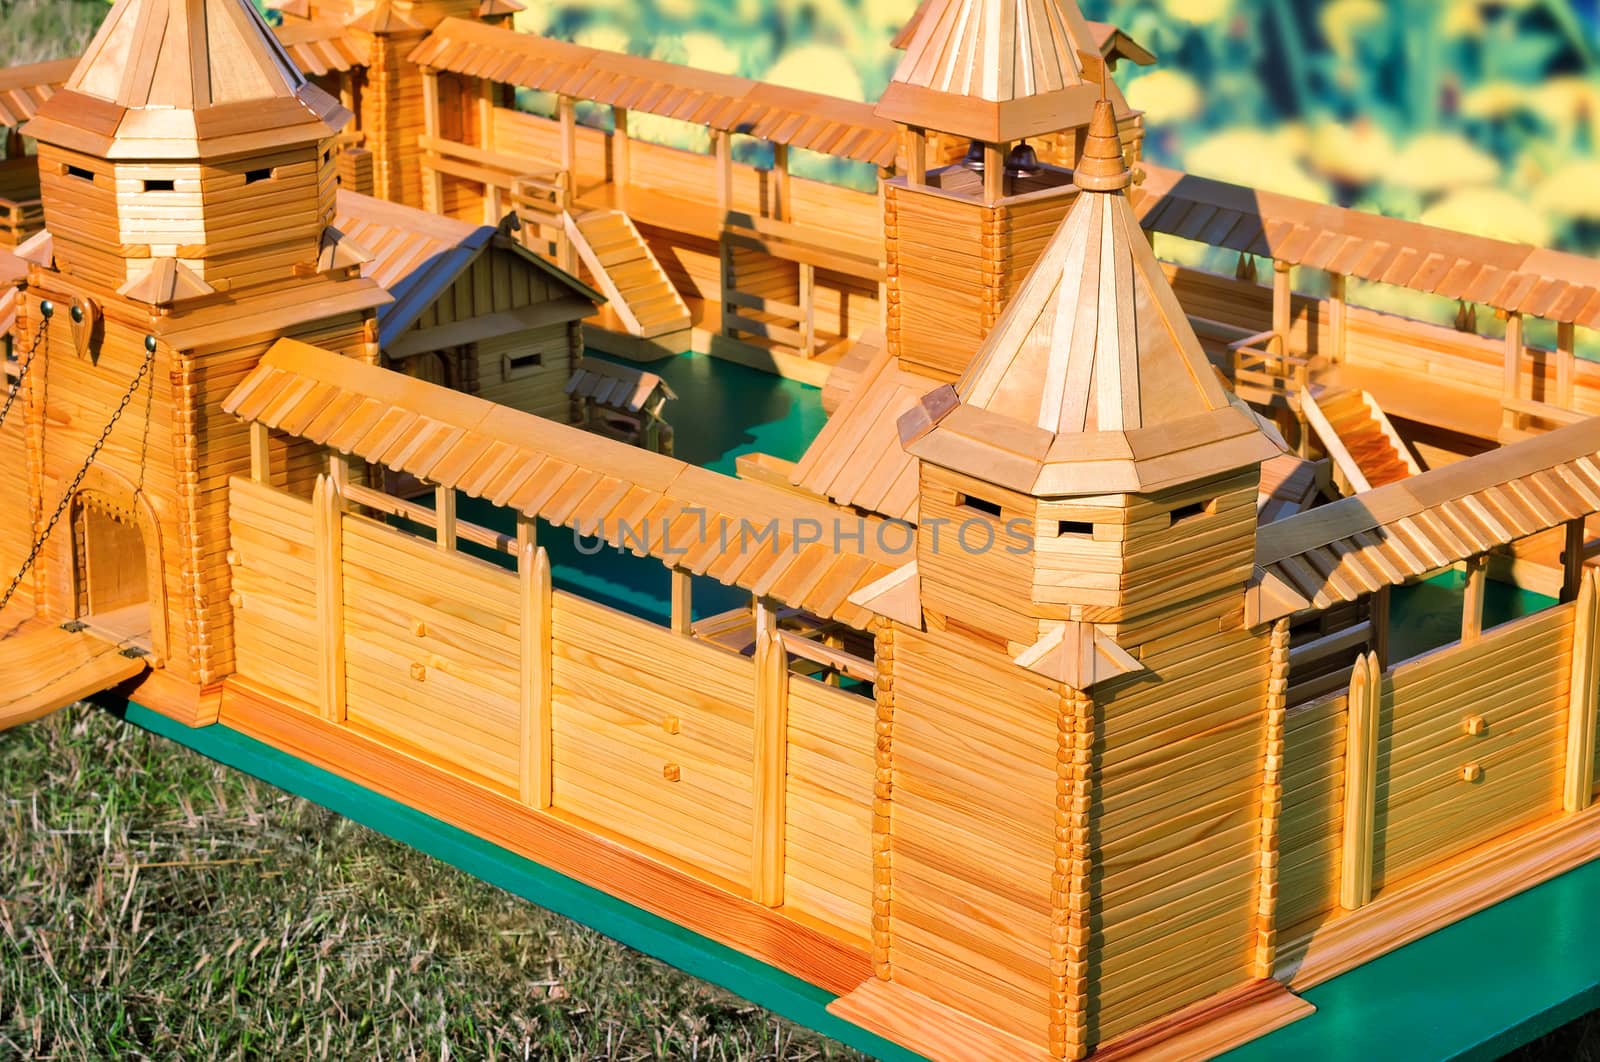 Depicted artful is made of natural wood the layout of an ancient fortress with ramparts, towers, gates, stairs, outbuildings.